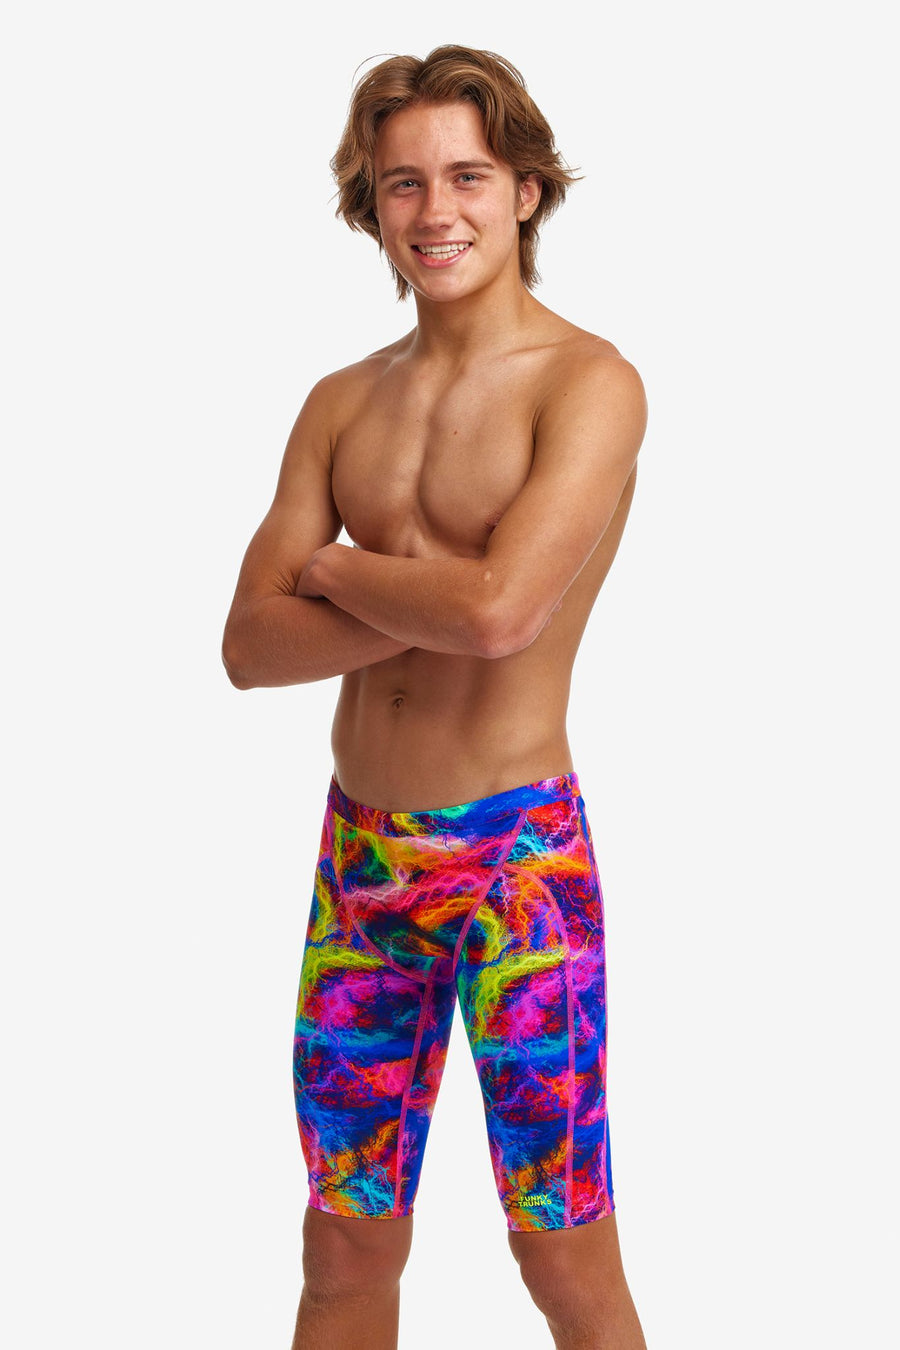 Compare Lowest Prices Promotional goods TIZAX Kids Swimming Briefs Boys ...